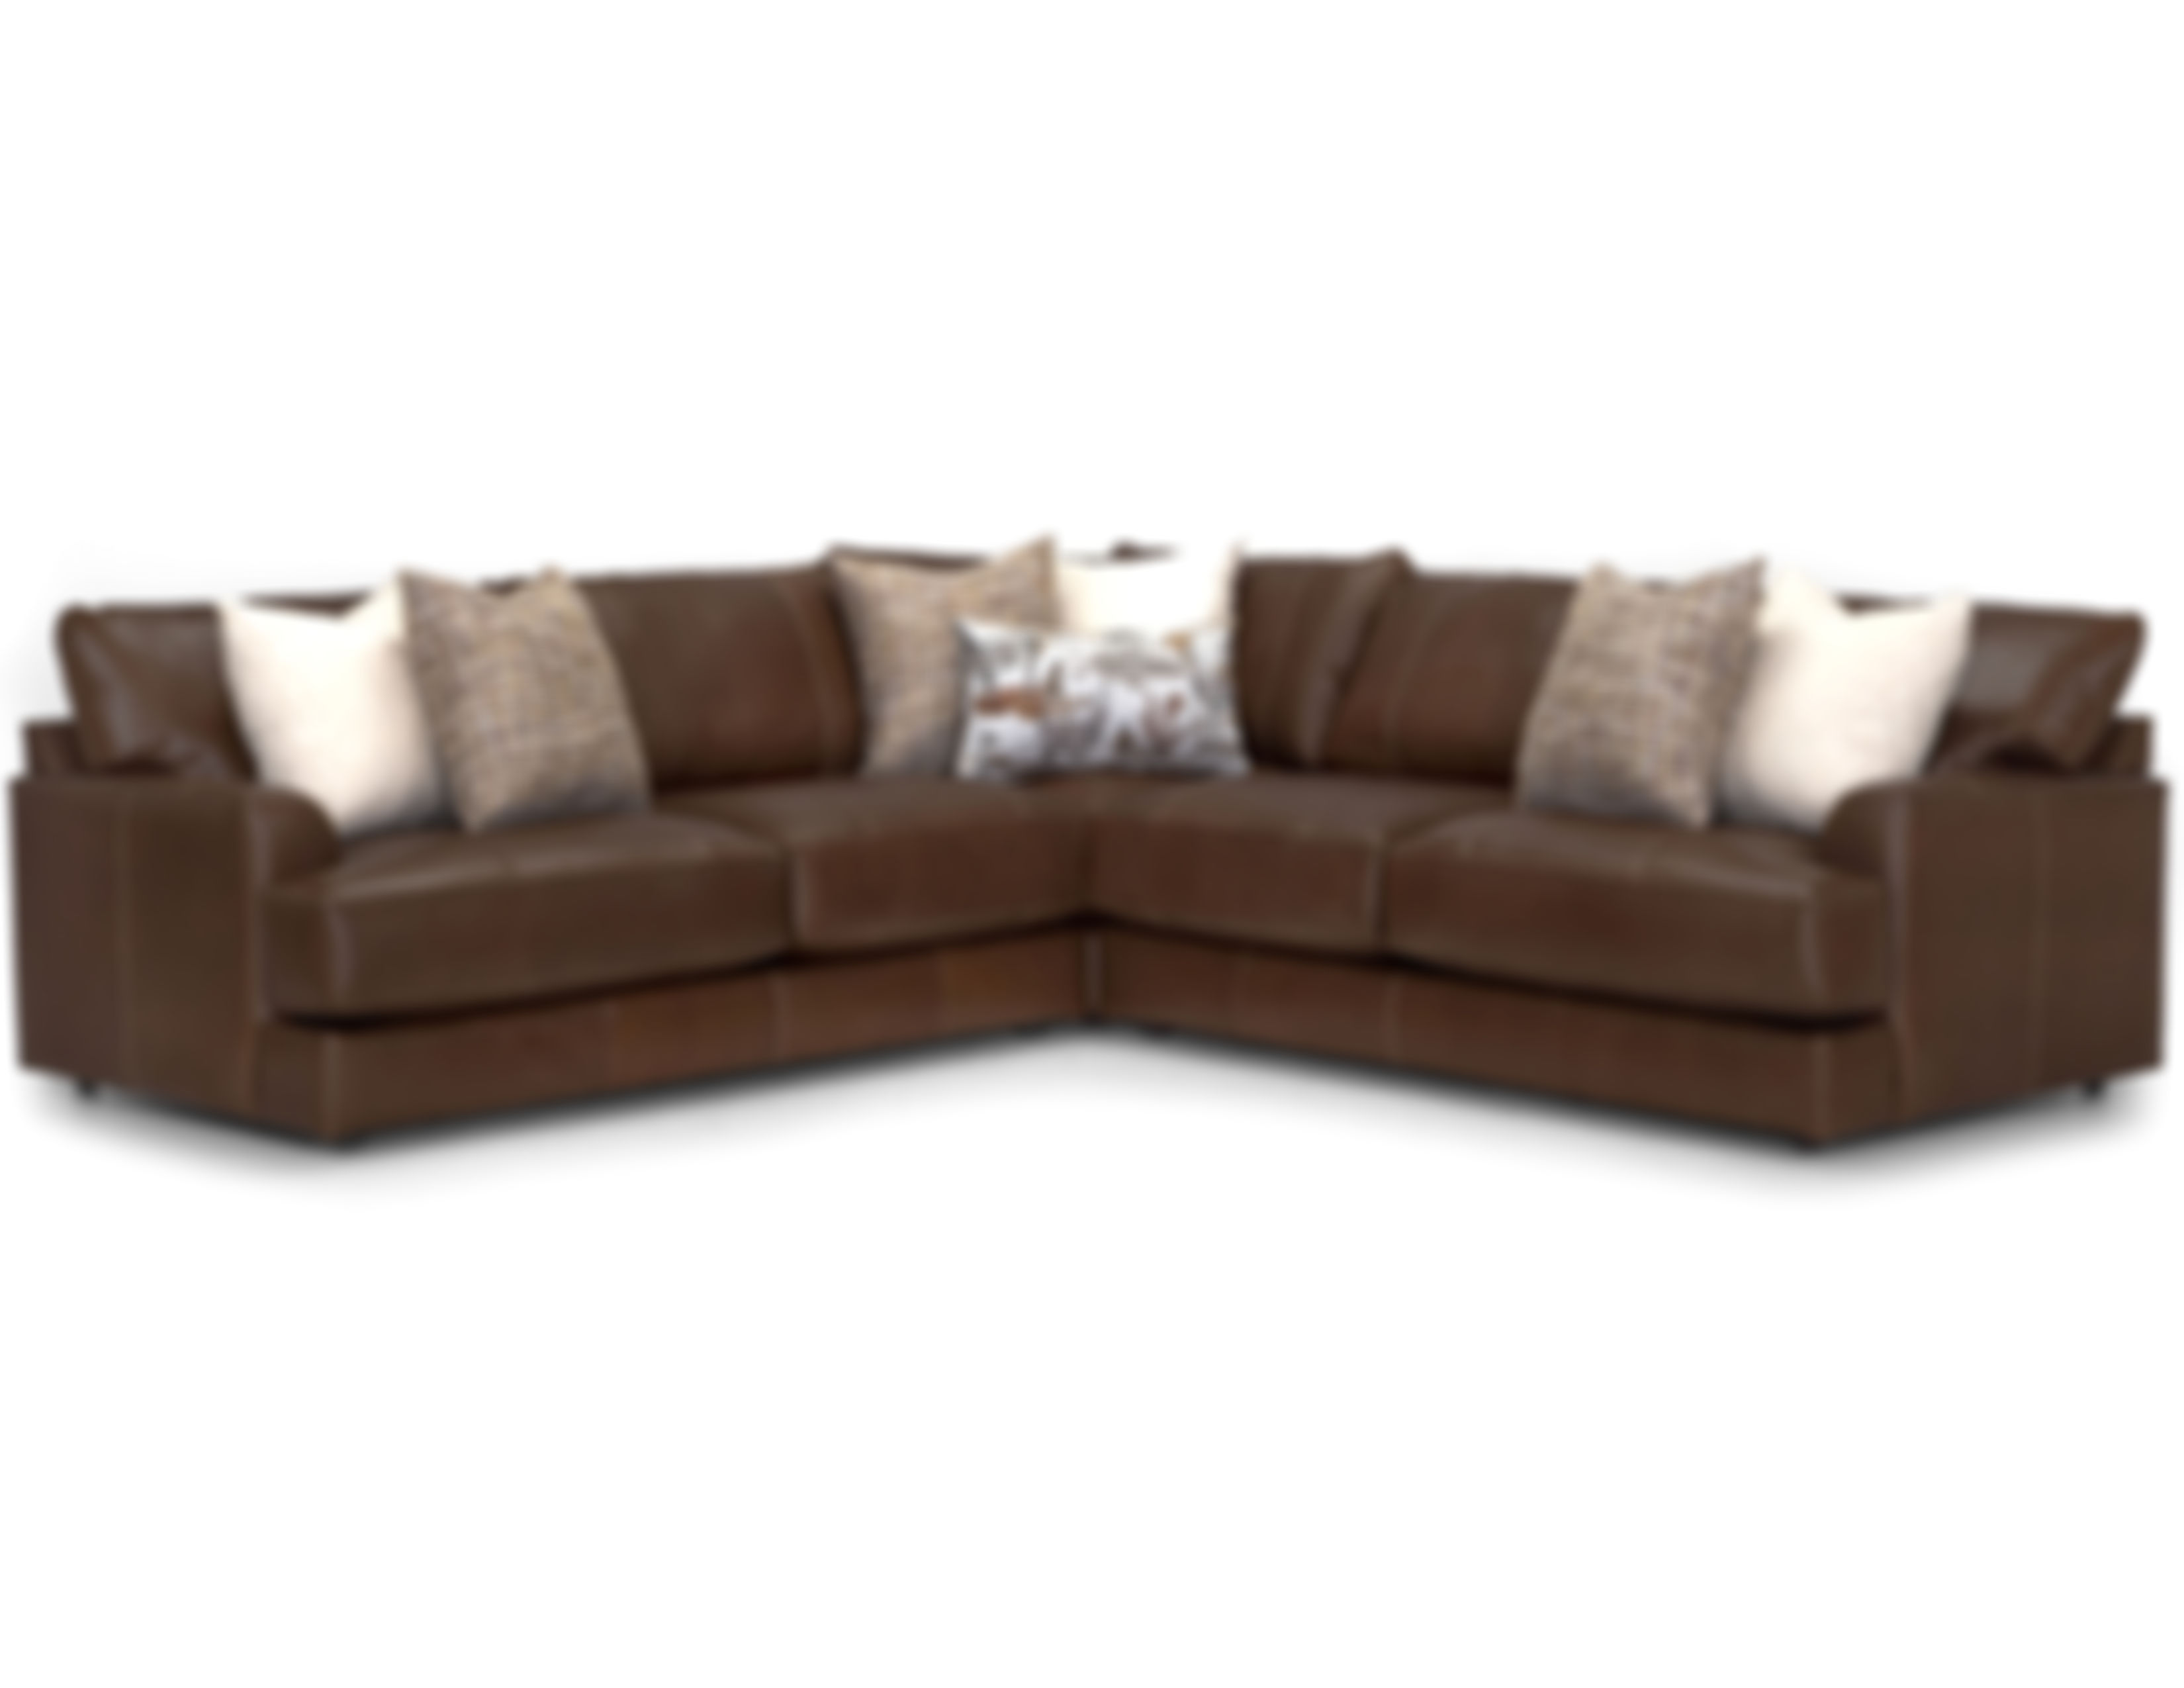 Gemma 900 Leather Sectional Sofas And, Leather Microfiber Sectional